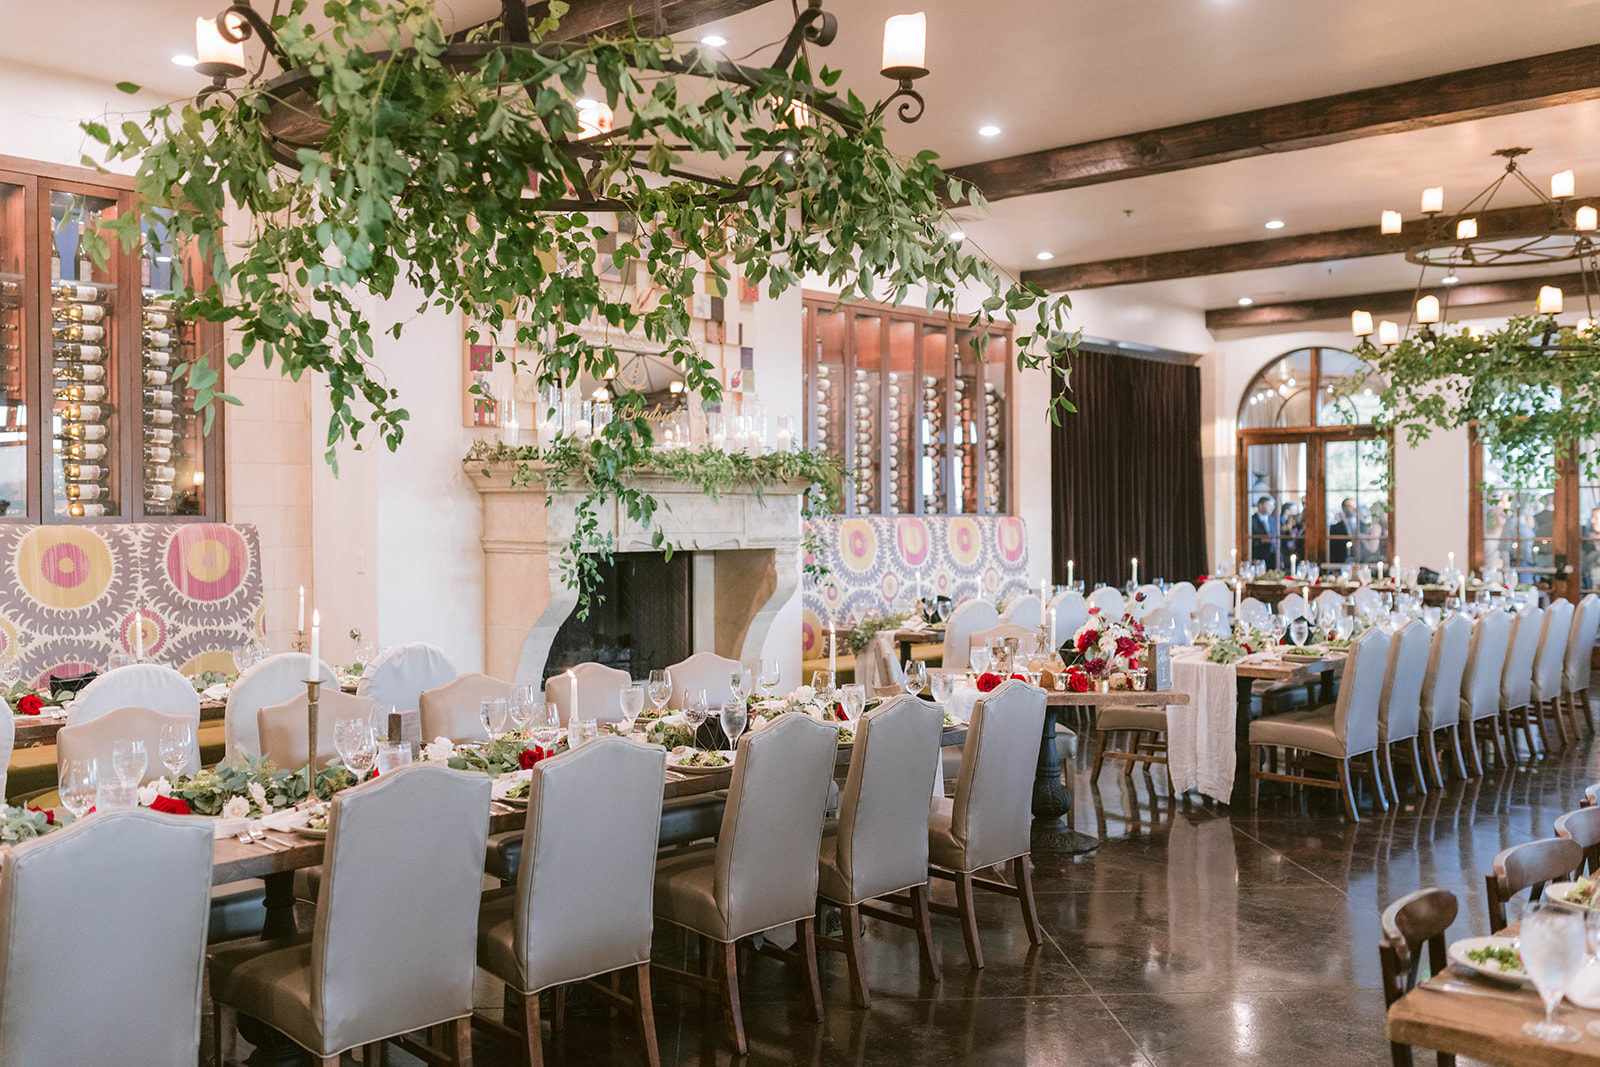 Interior restaurant styled for a wedding at Montaluce Winery featuring southern smilax and red flowers